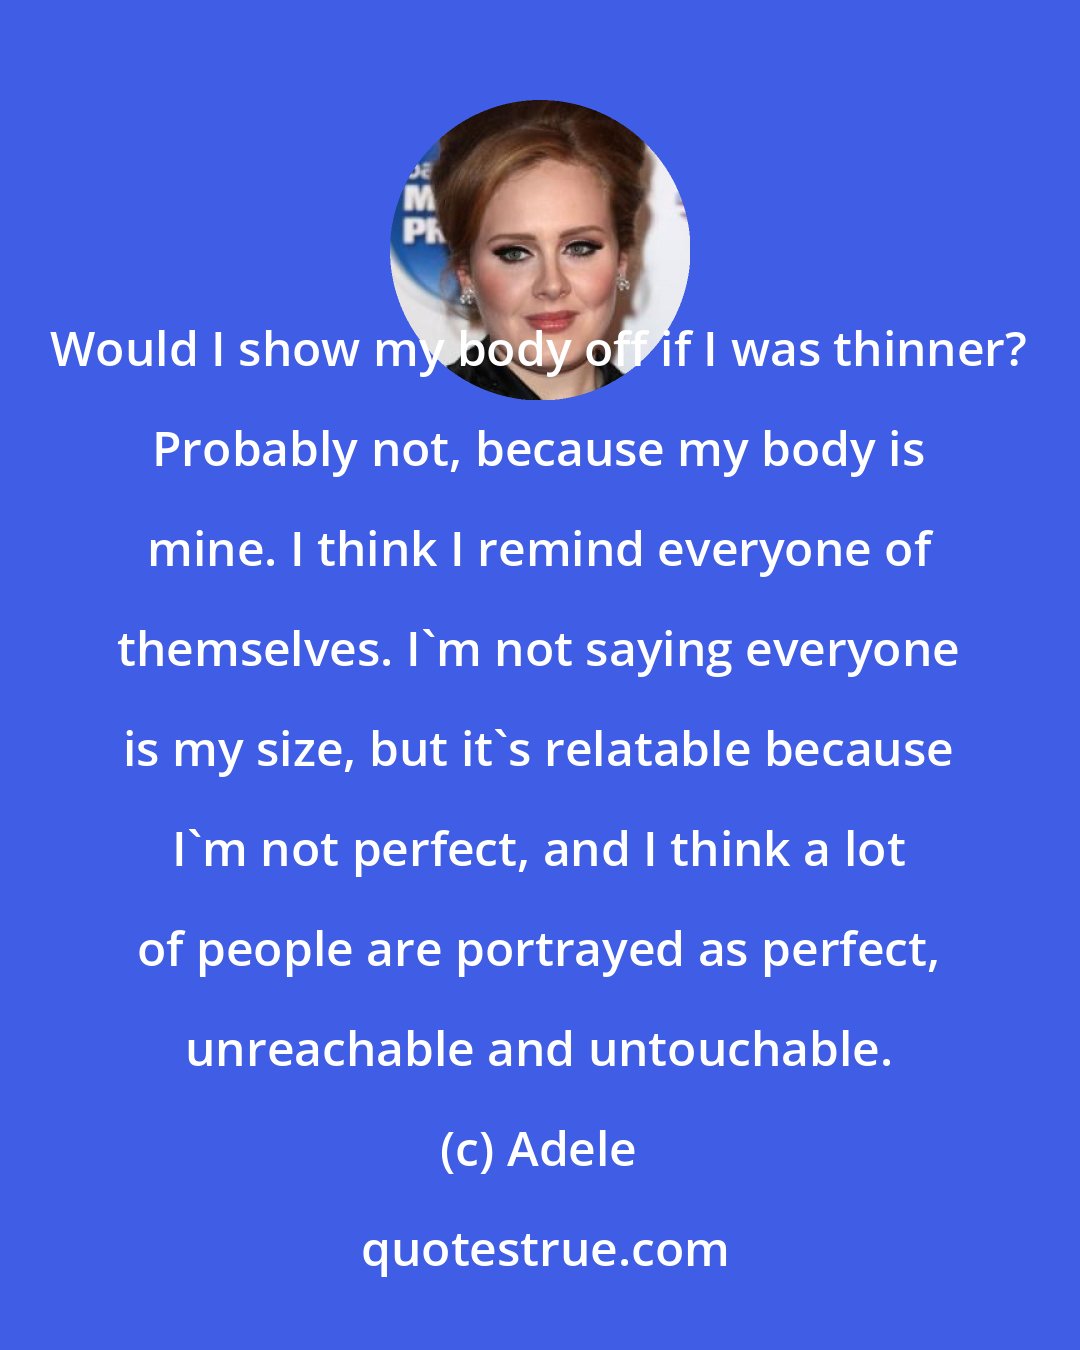 Adele: Would I show my body off if I was thinner? Probably not, because my body is mine. I think I remind everyone of themselves. I'm not saying everyone is my size, but it's relatable because I'm not perfect, and I think a lot of people are portrayed as perfect, unreachable and untouchable.